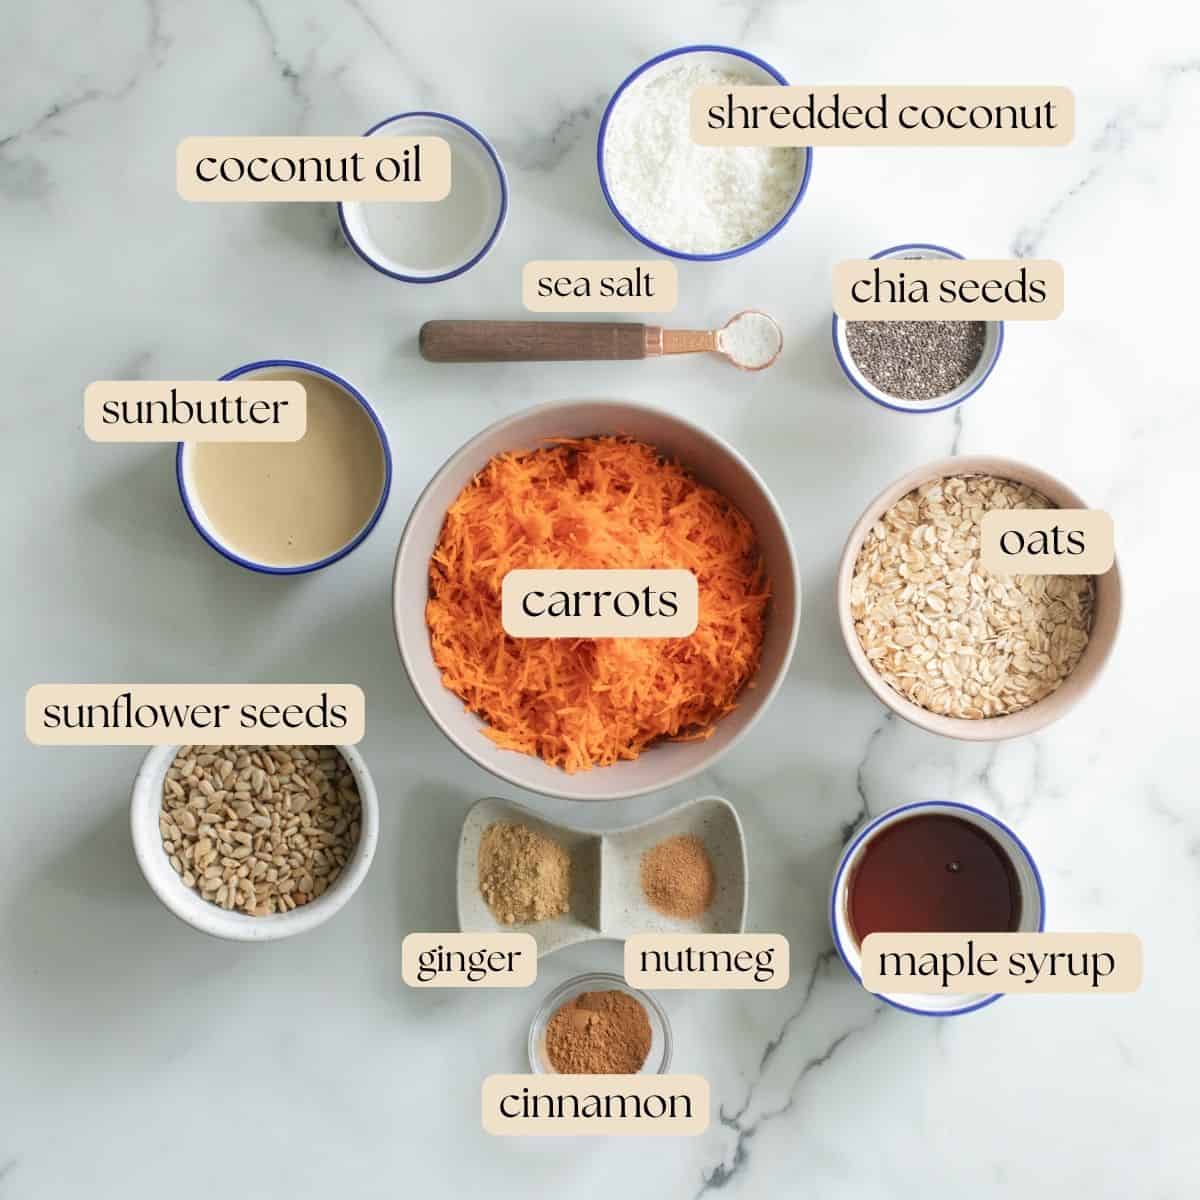 The 12 ingredients necessary to make carrot cake energy balls in pinch bowls, measuring cups and mixing bowls on a countertop.